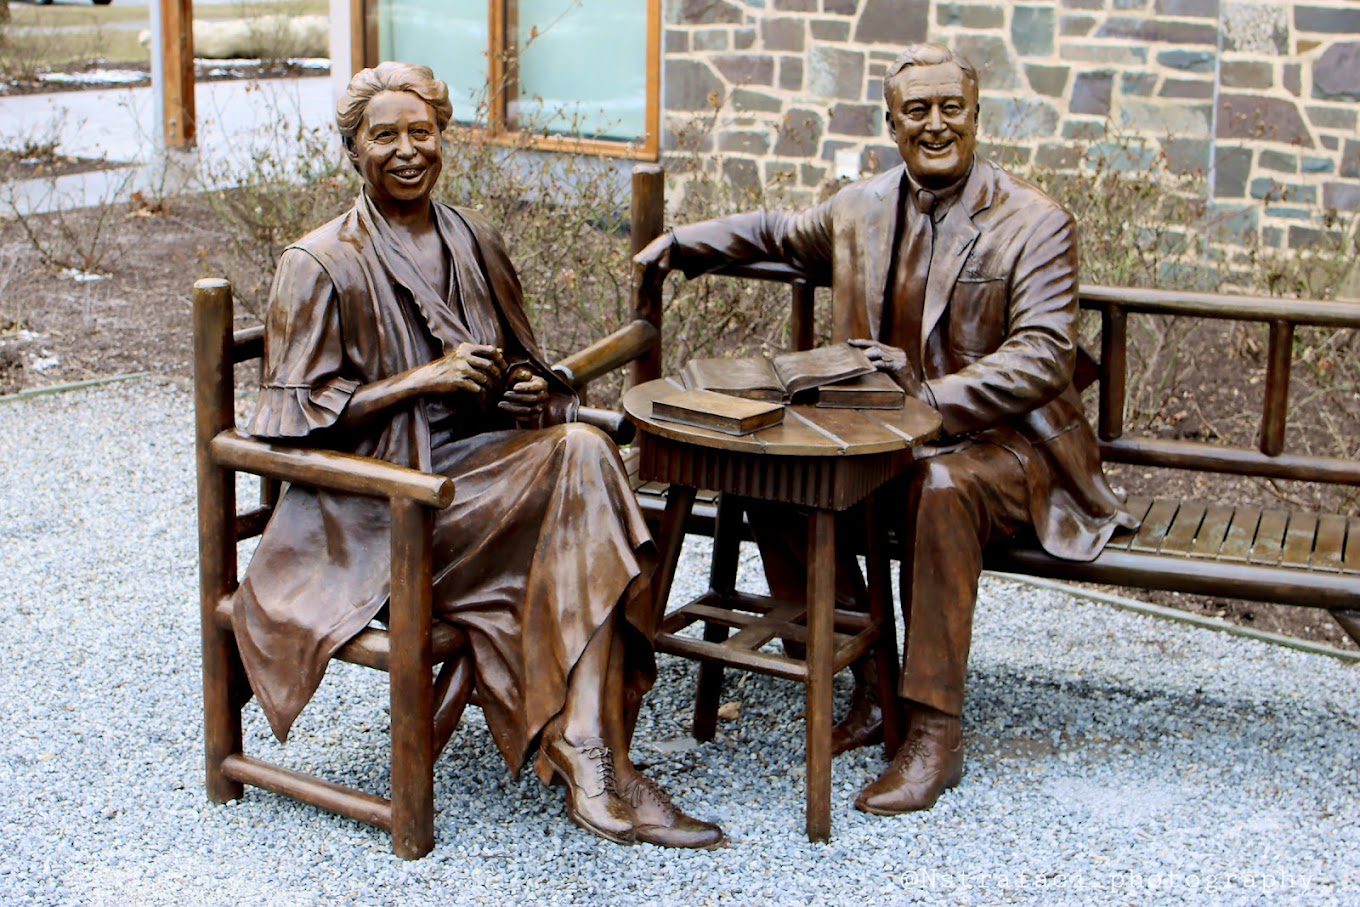 A statue of two people sitting at a table.